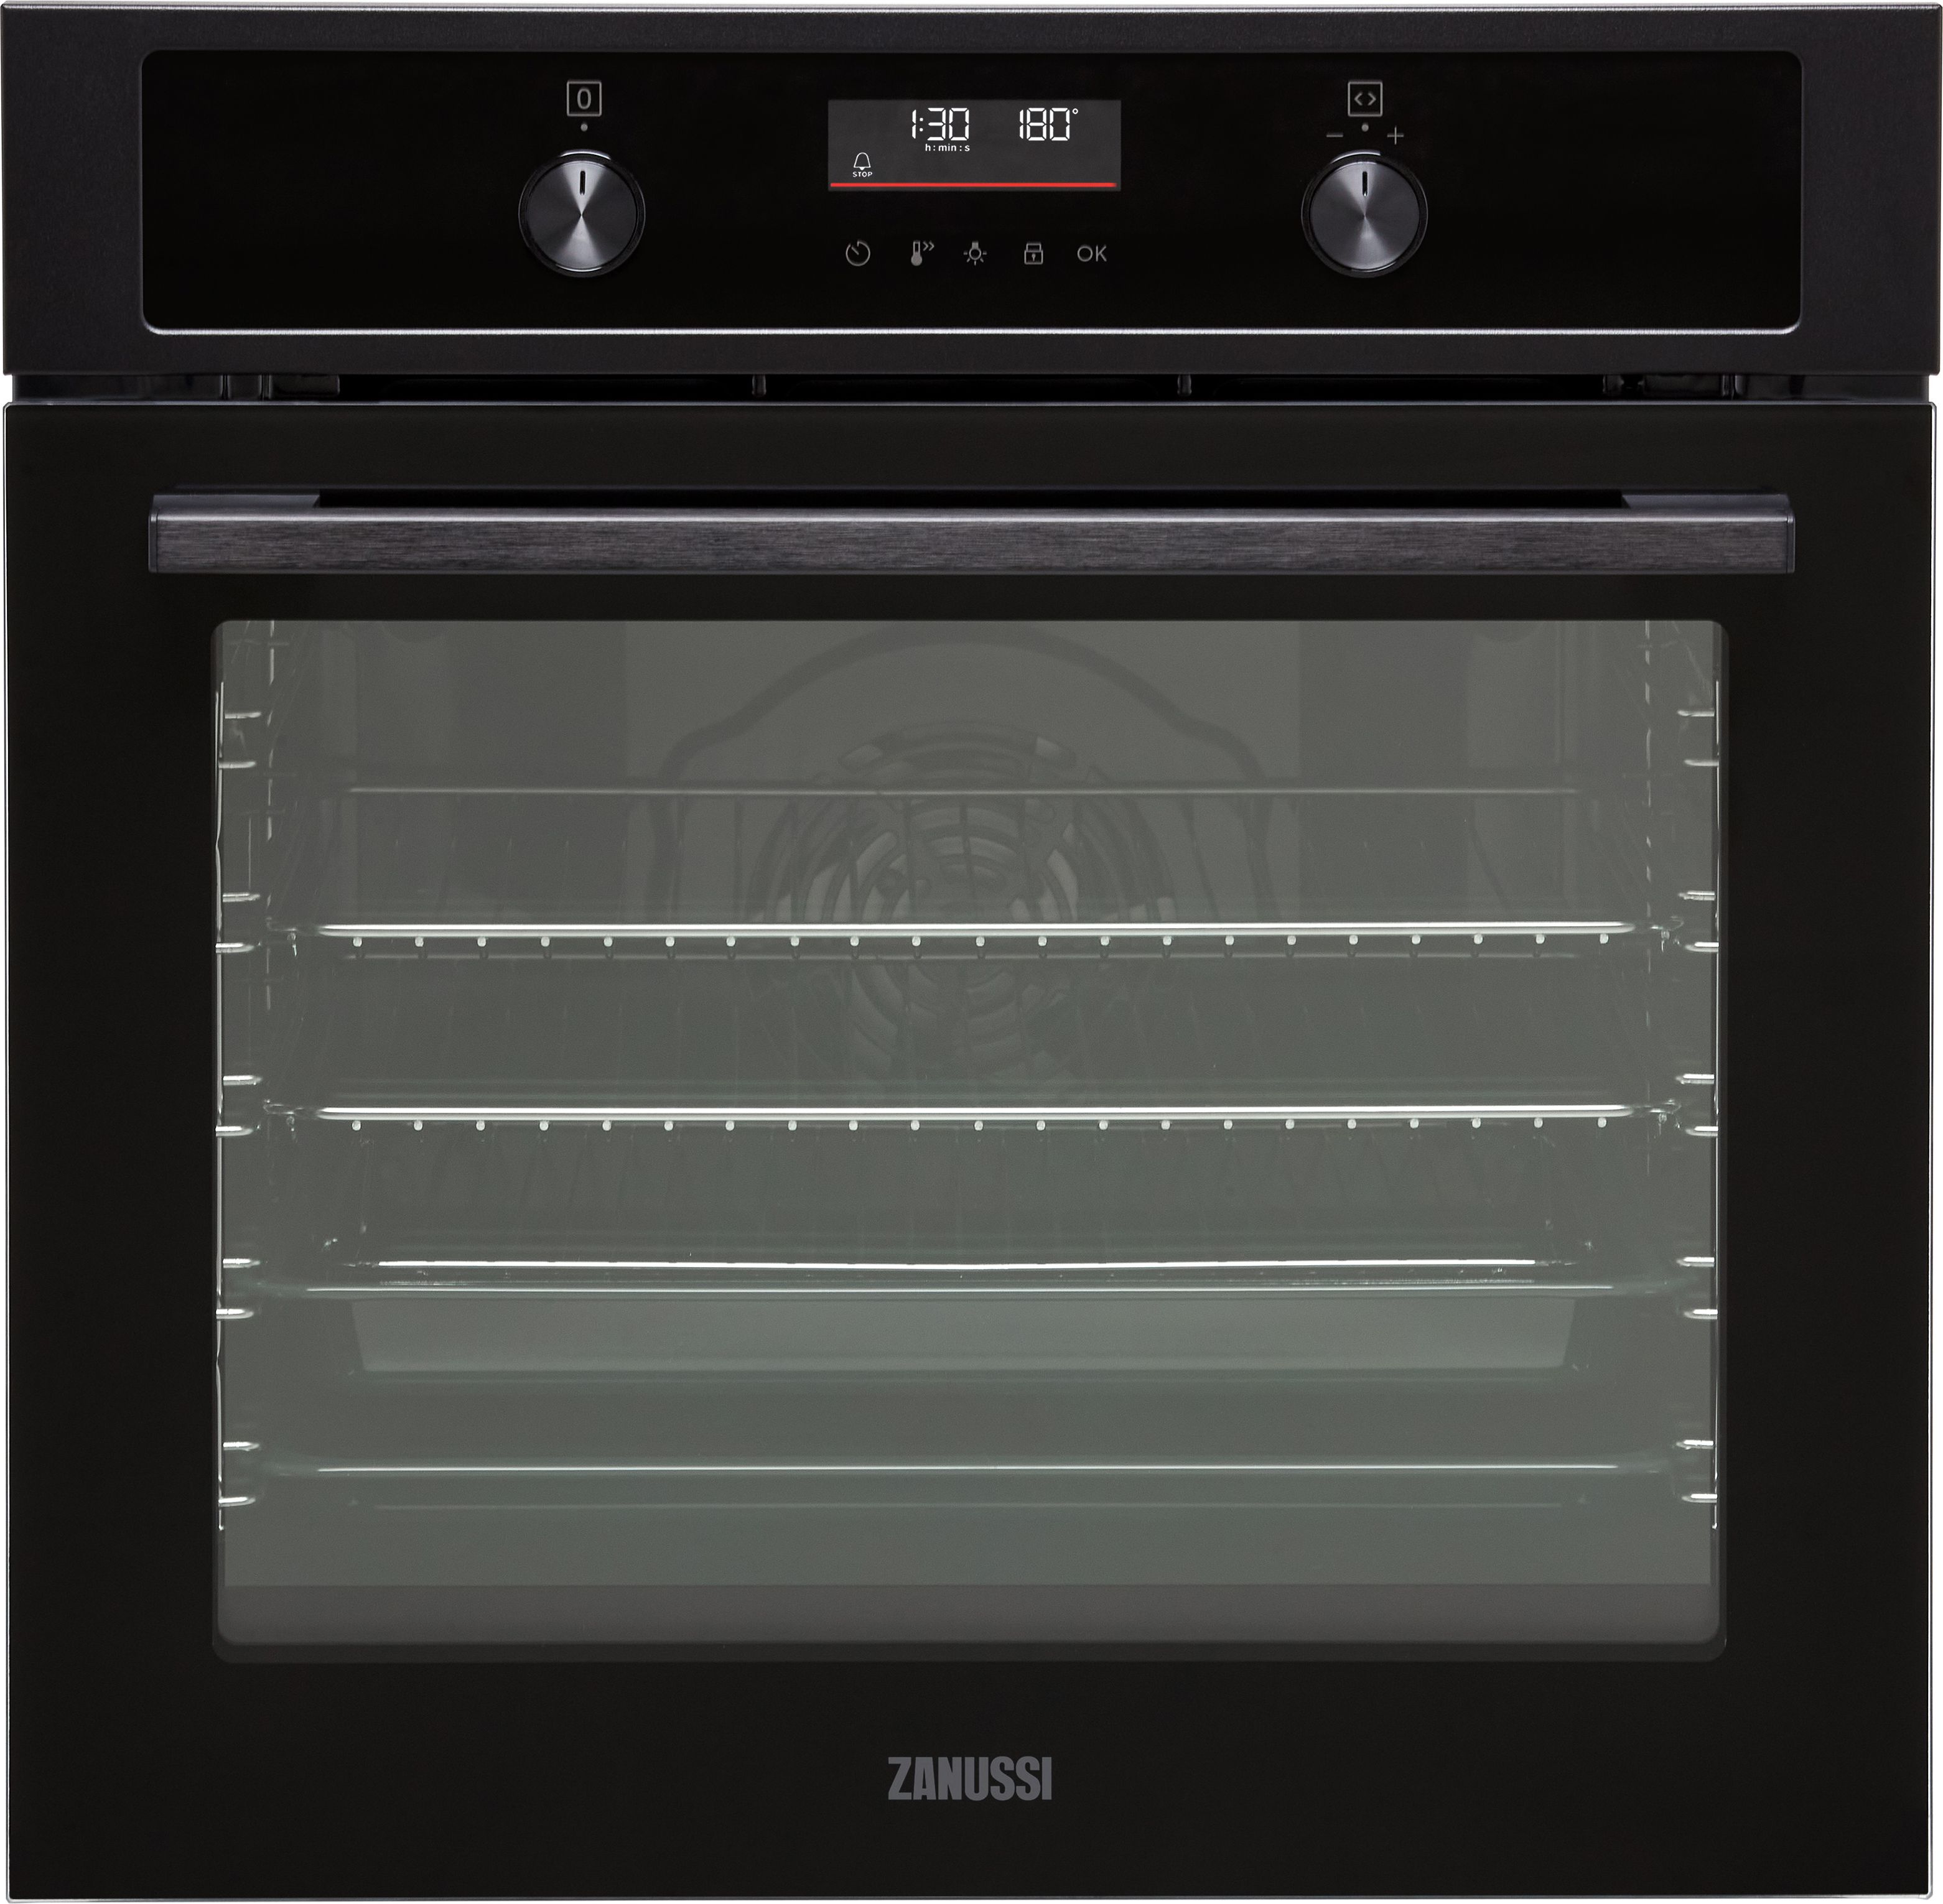 Zanussi ZOHNA7KN Built In Electric Single Oven - Black - A+ Rated, Black